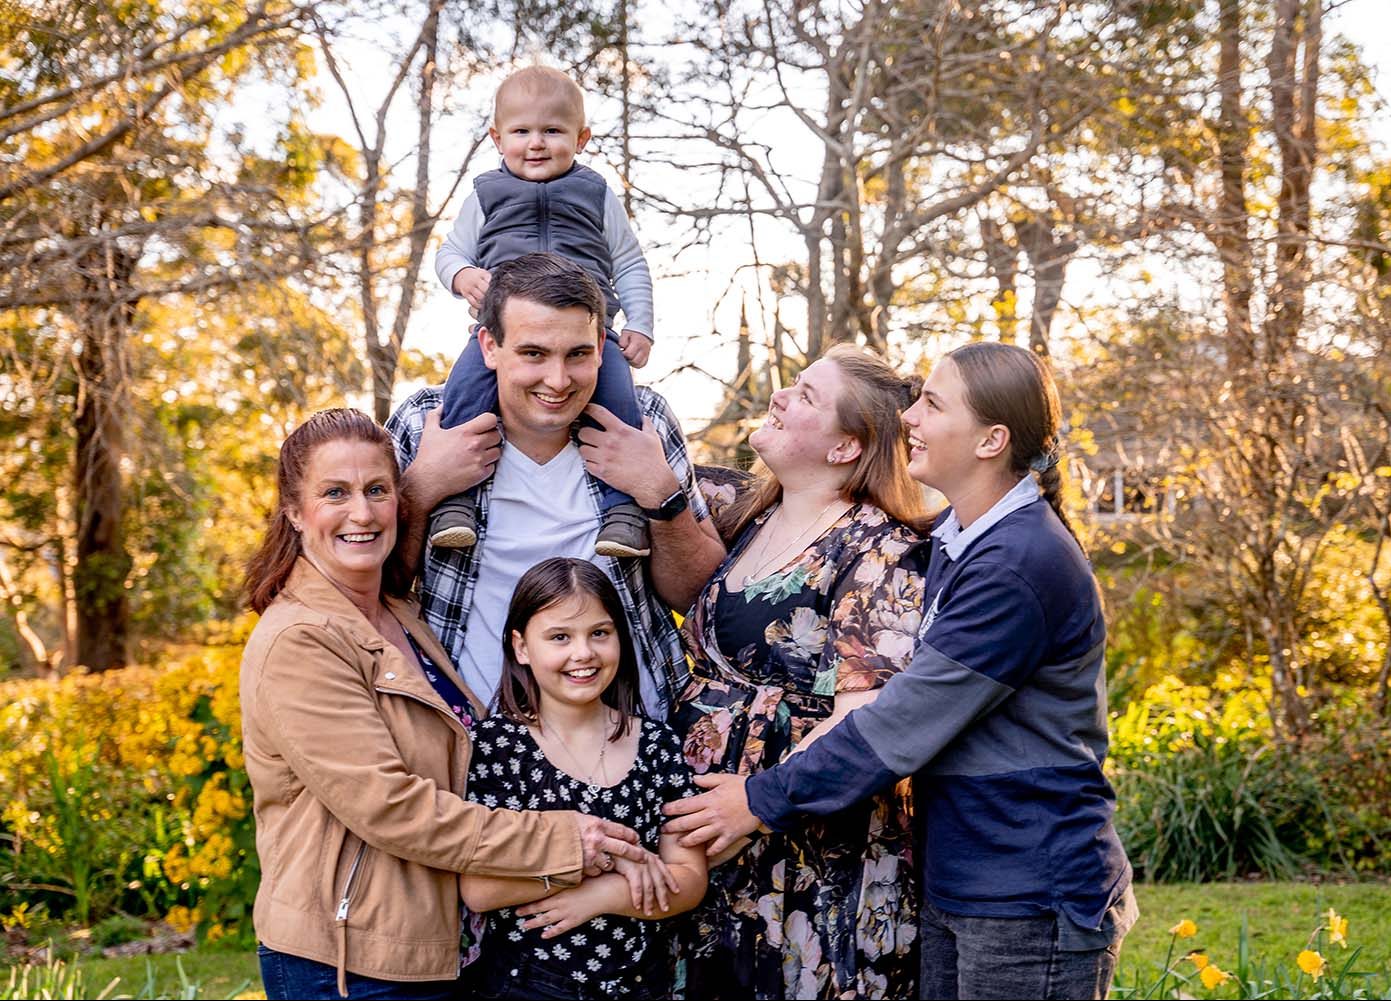 Family Photography - family together